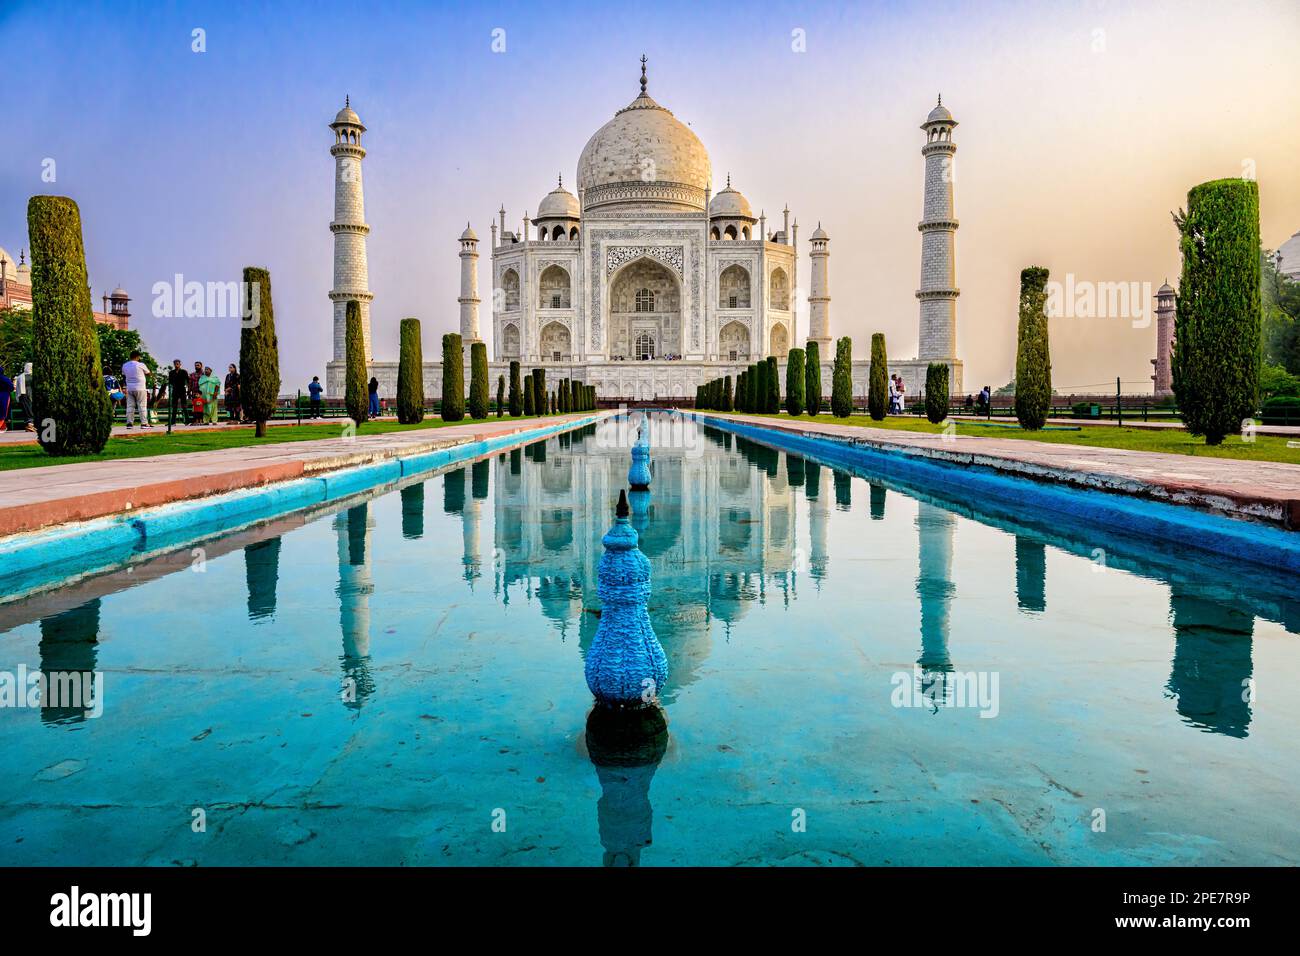 Symmetrical relection of the Taj Mahal in the reflecting pool situated in the perfectly ordered surrounding gardens, which are typical of Mughal art Stock Photo